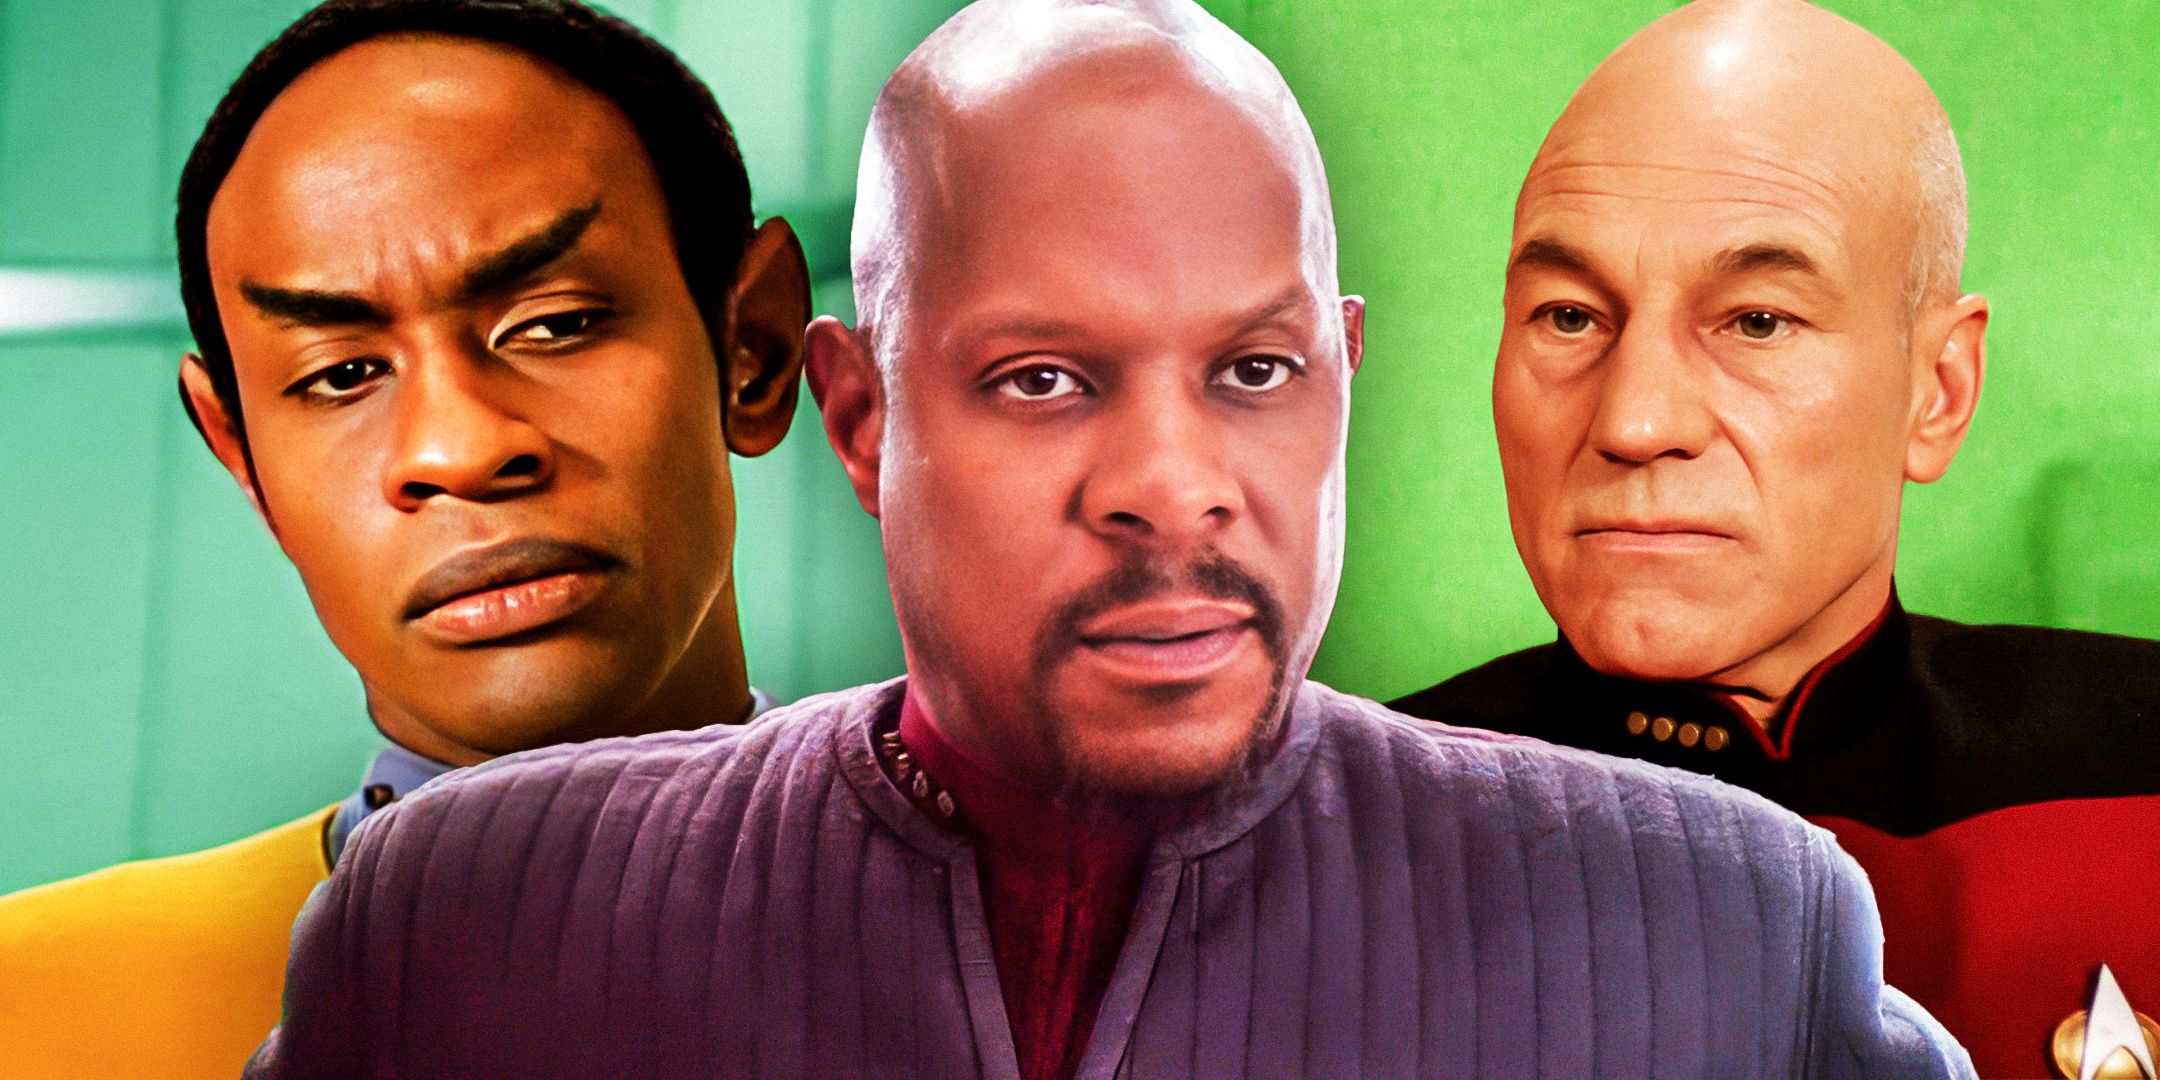 Patrick-Stewart-as-Captain-Jean-Luc-Picard-from-Star-TrekThe-Next-Generation-Avery-Brooks-as-Captain-Benjamin-Ben-Sisko-from-Star-Trek-Deep-Space-Nine-and-Tim-Russ-as-Lt